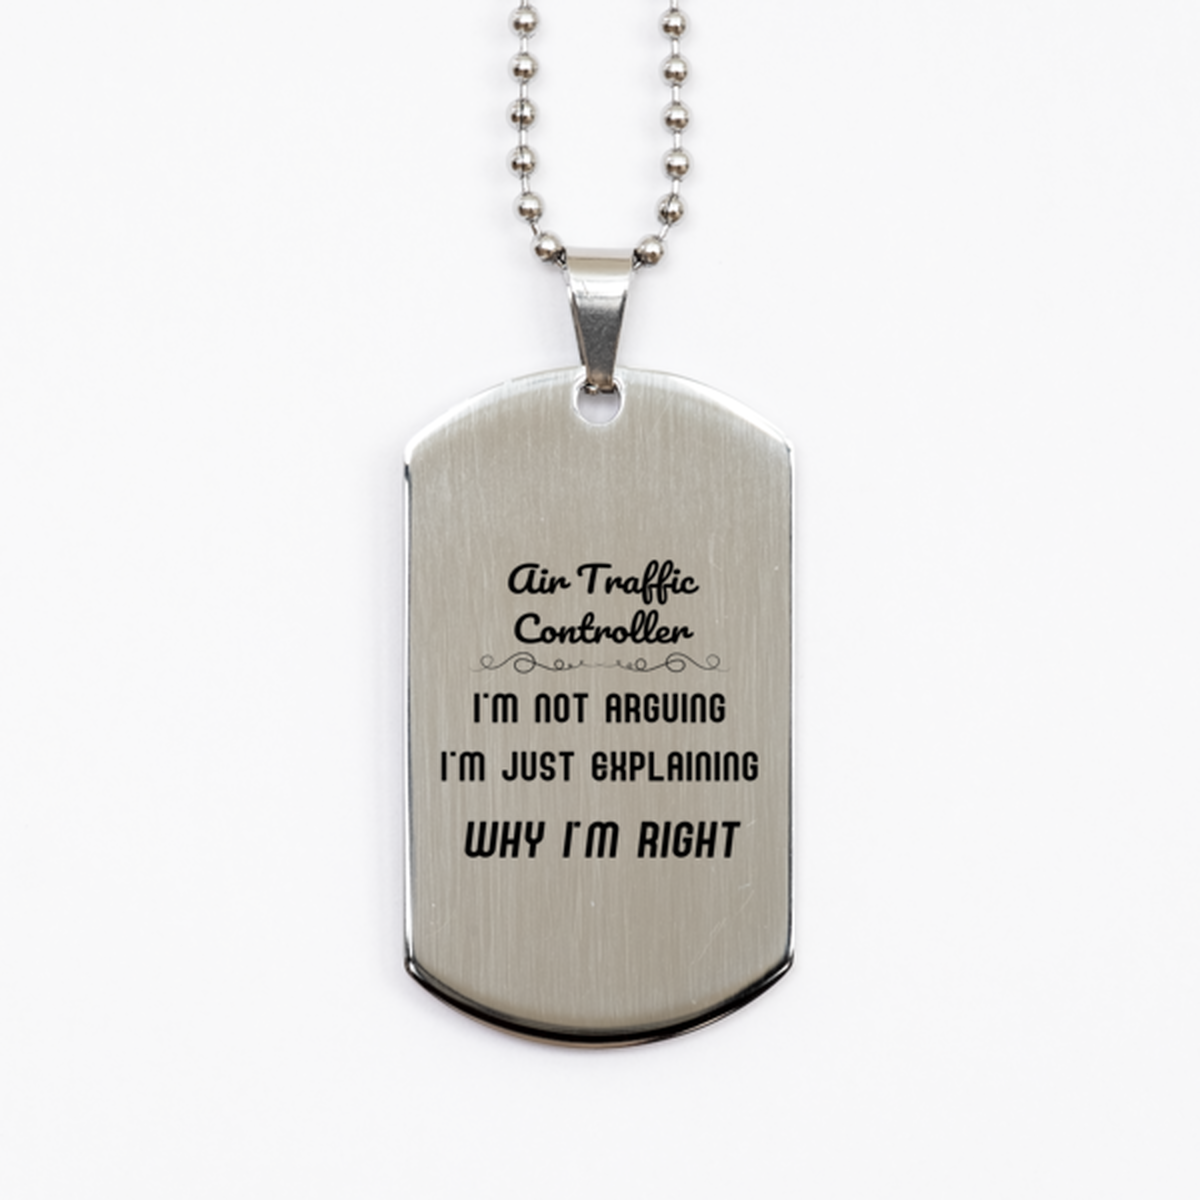 Air Traffic Controller I'm not Arguing. I'm Just Explaining Why I'm RIGHT Silver Dog Tag, Funny Saying Quote Air Traffic Controller Gifts For Air Traffic Controller Graduation Birthday Christmas Gifts for Men Women Coworker